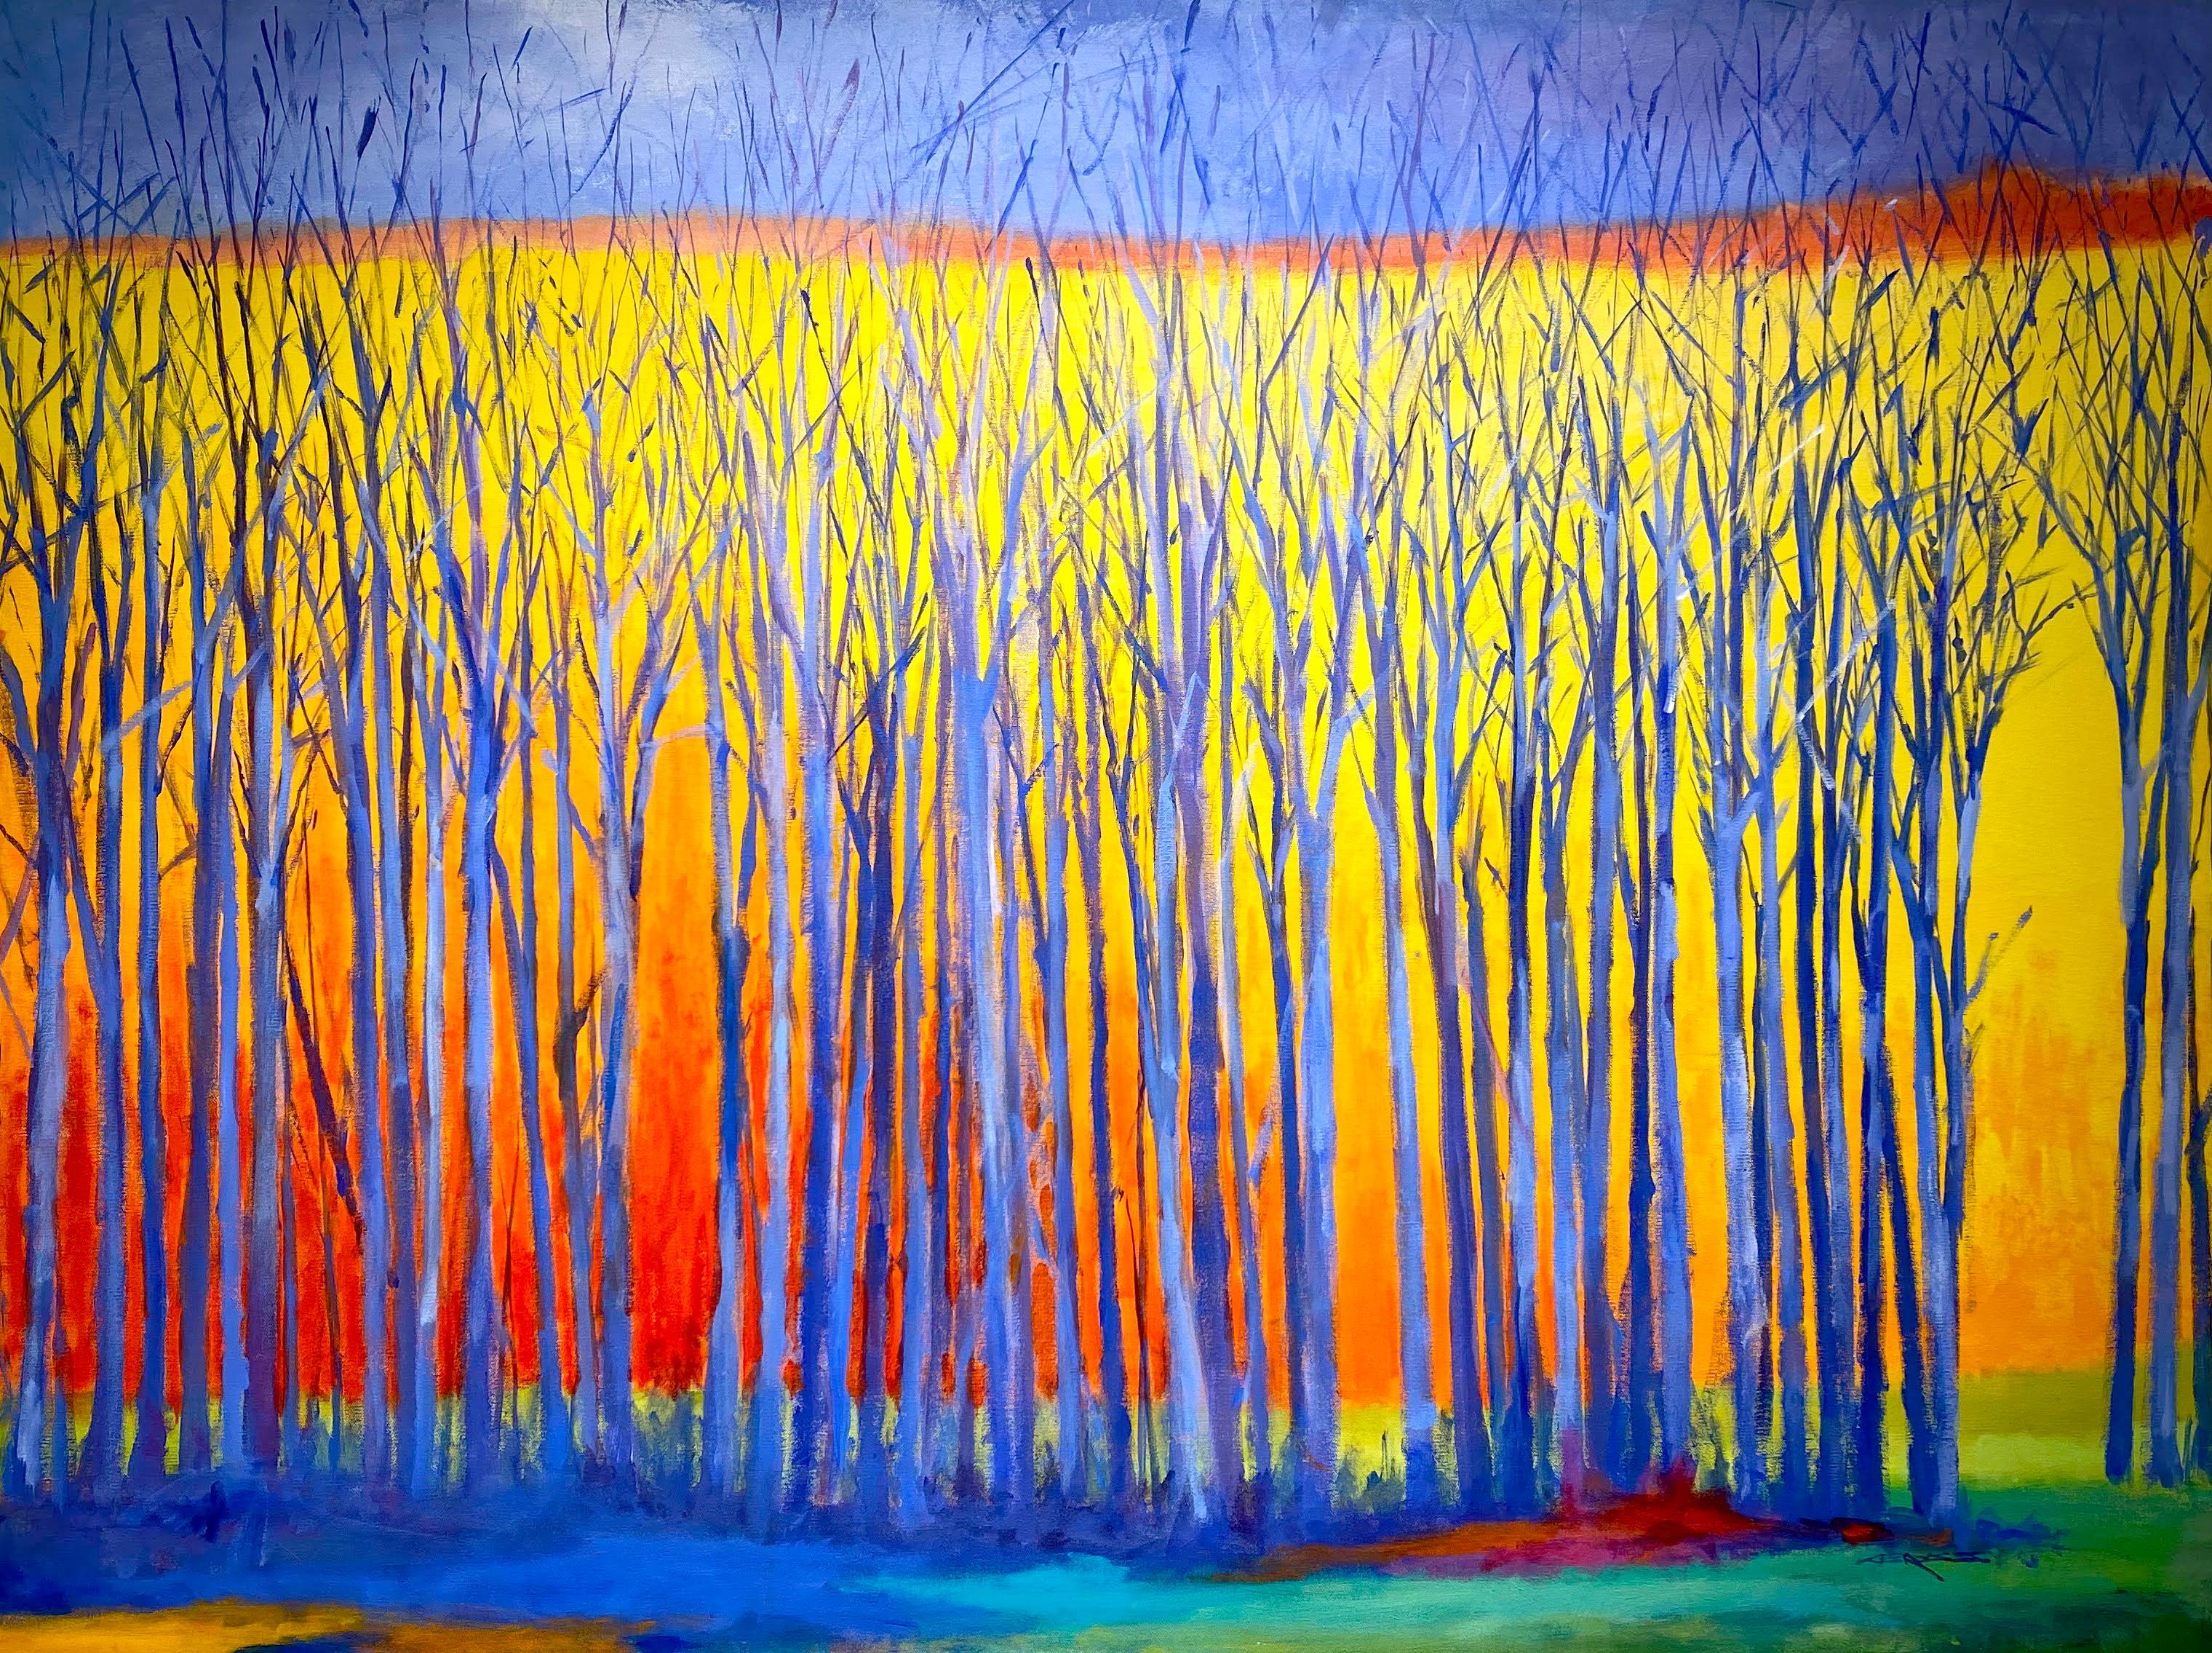 Charles Emery Ross Landscape Painting - C.E. Ross, "Bare Blue Trees", Colorful Abstract Landscape Acrylic on Canvas